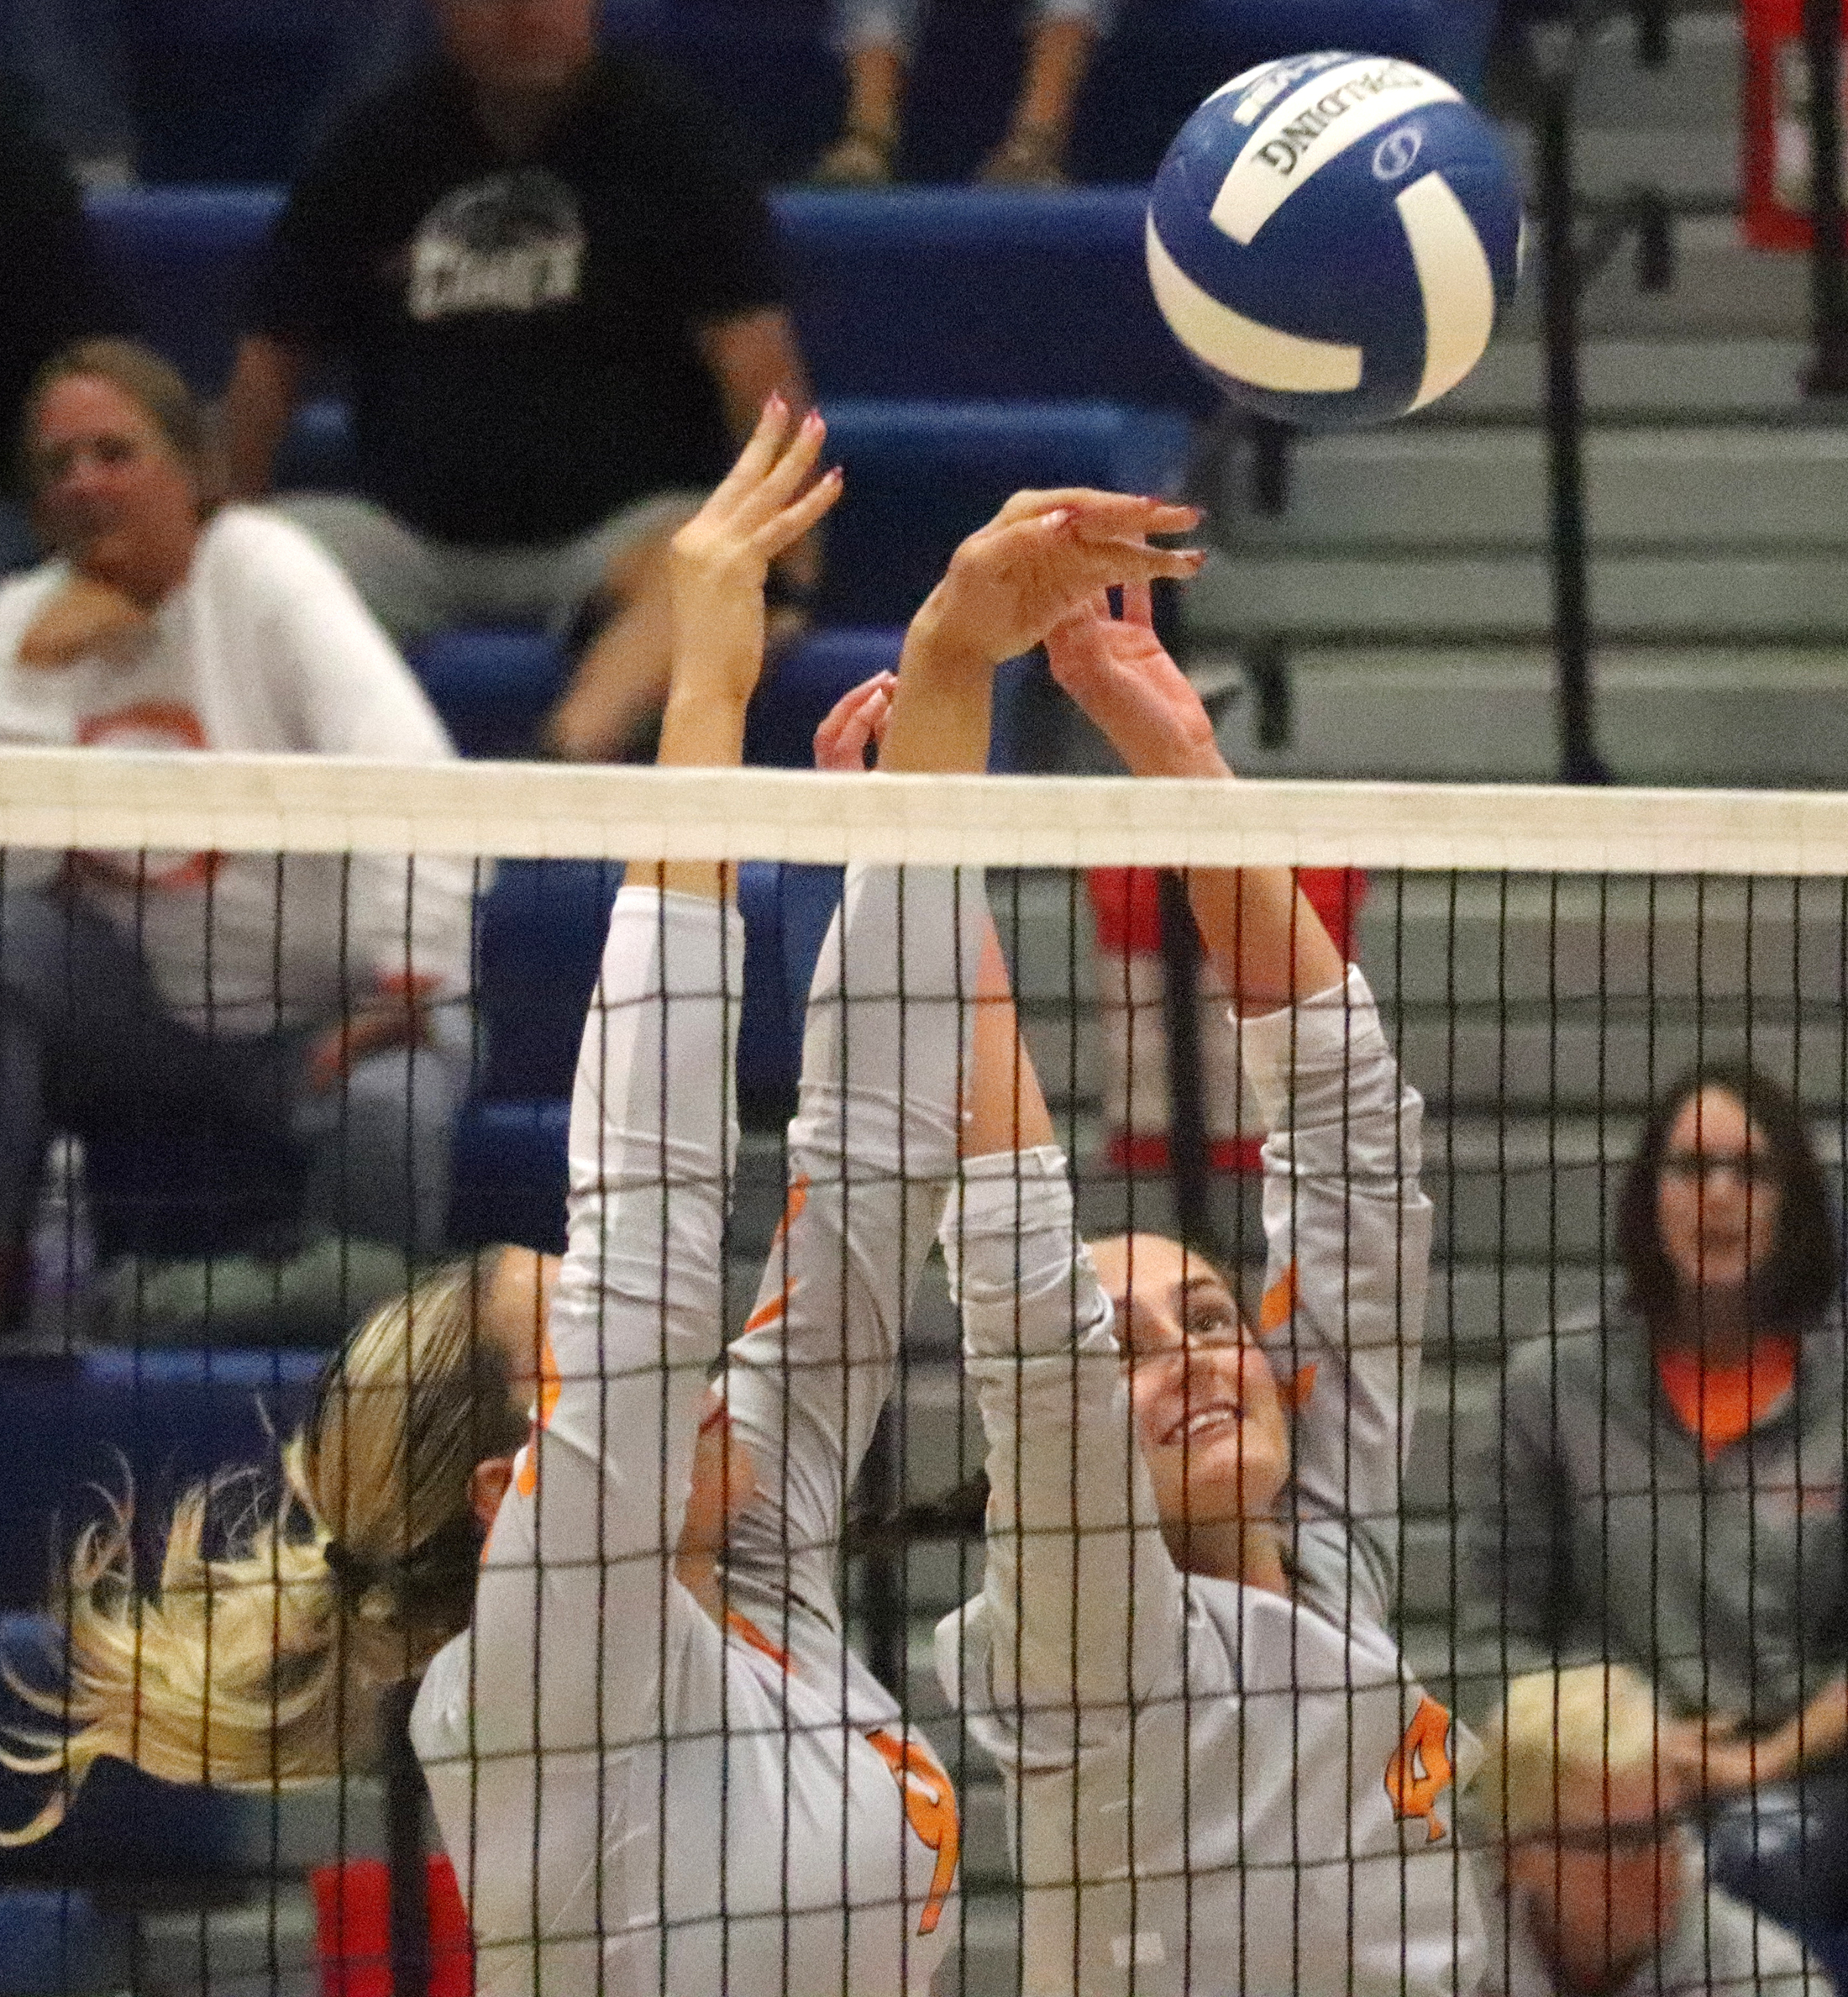 Comets sweep Vikings 3-0 in NEIC volleyball match